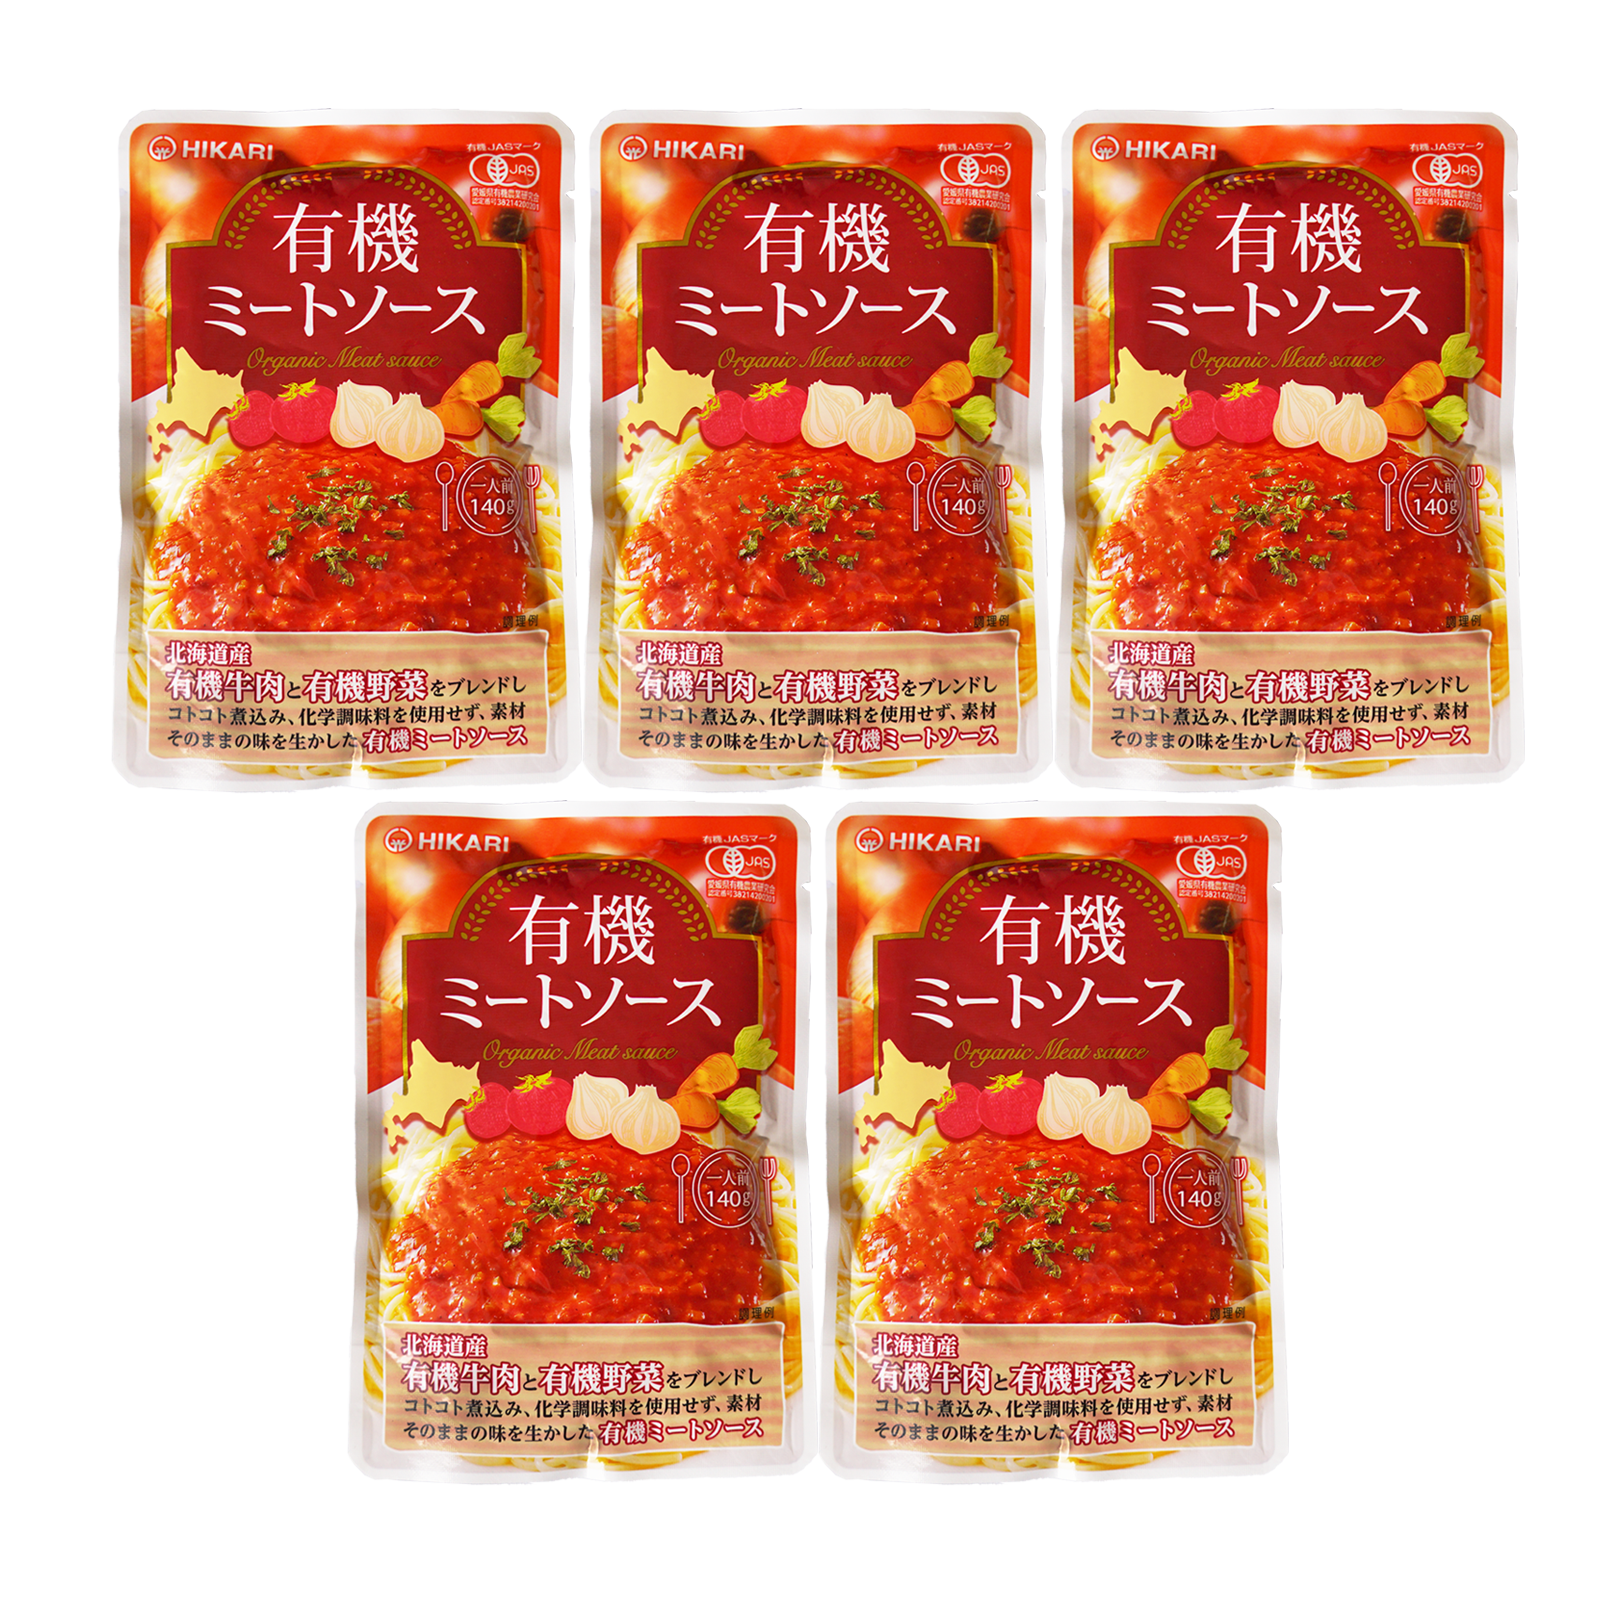 Certified Organic Ready-Made Meat Sauce Pouch for Pasta (140g x 5) - Horizon Farms